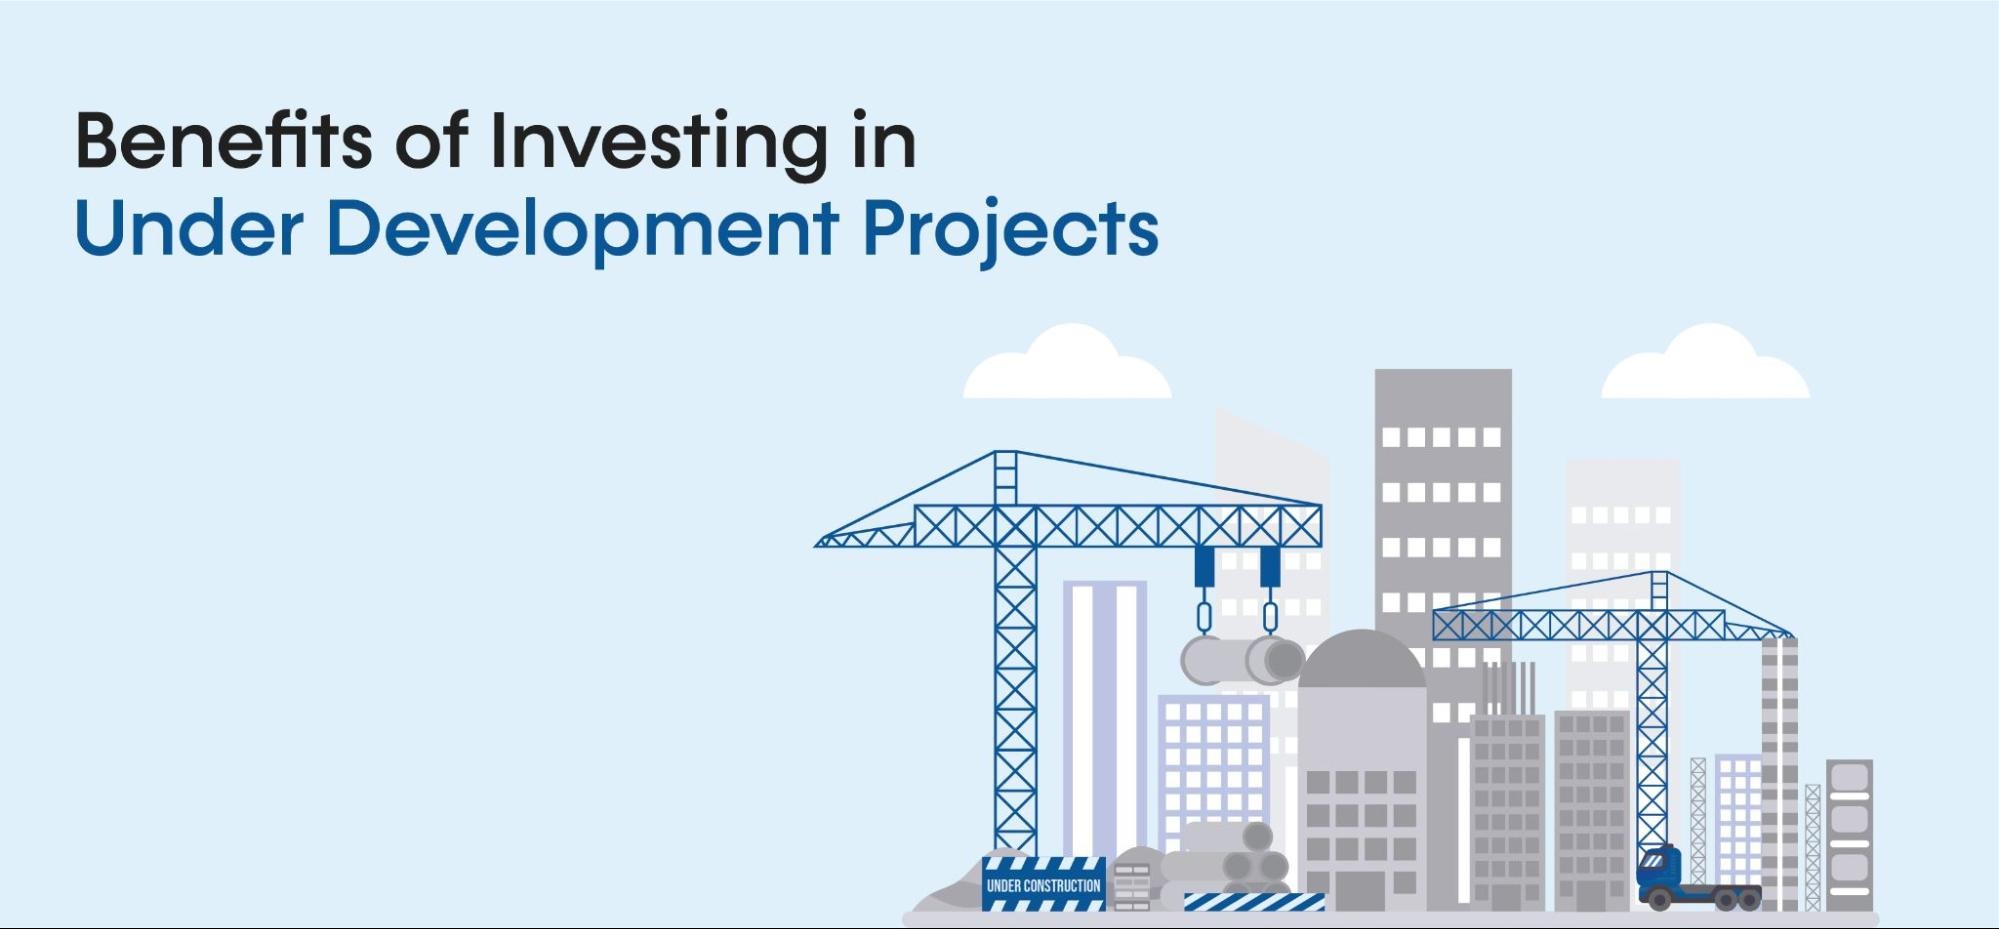 Benefits of investing in under development projects